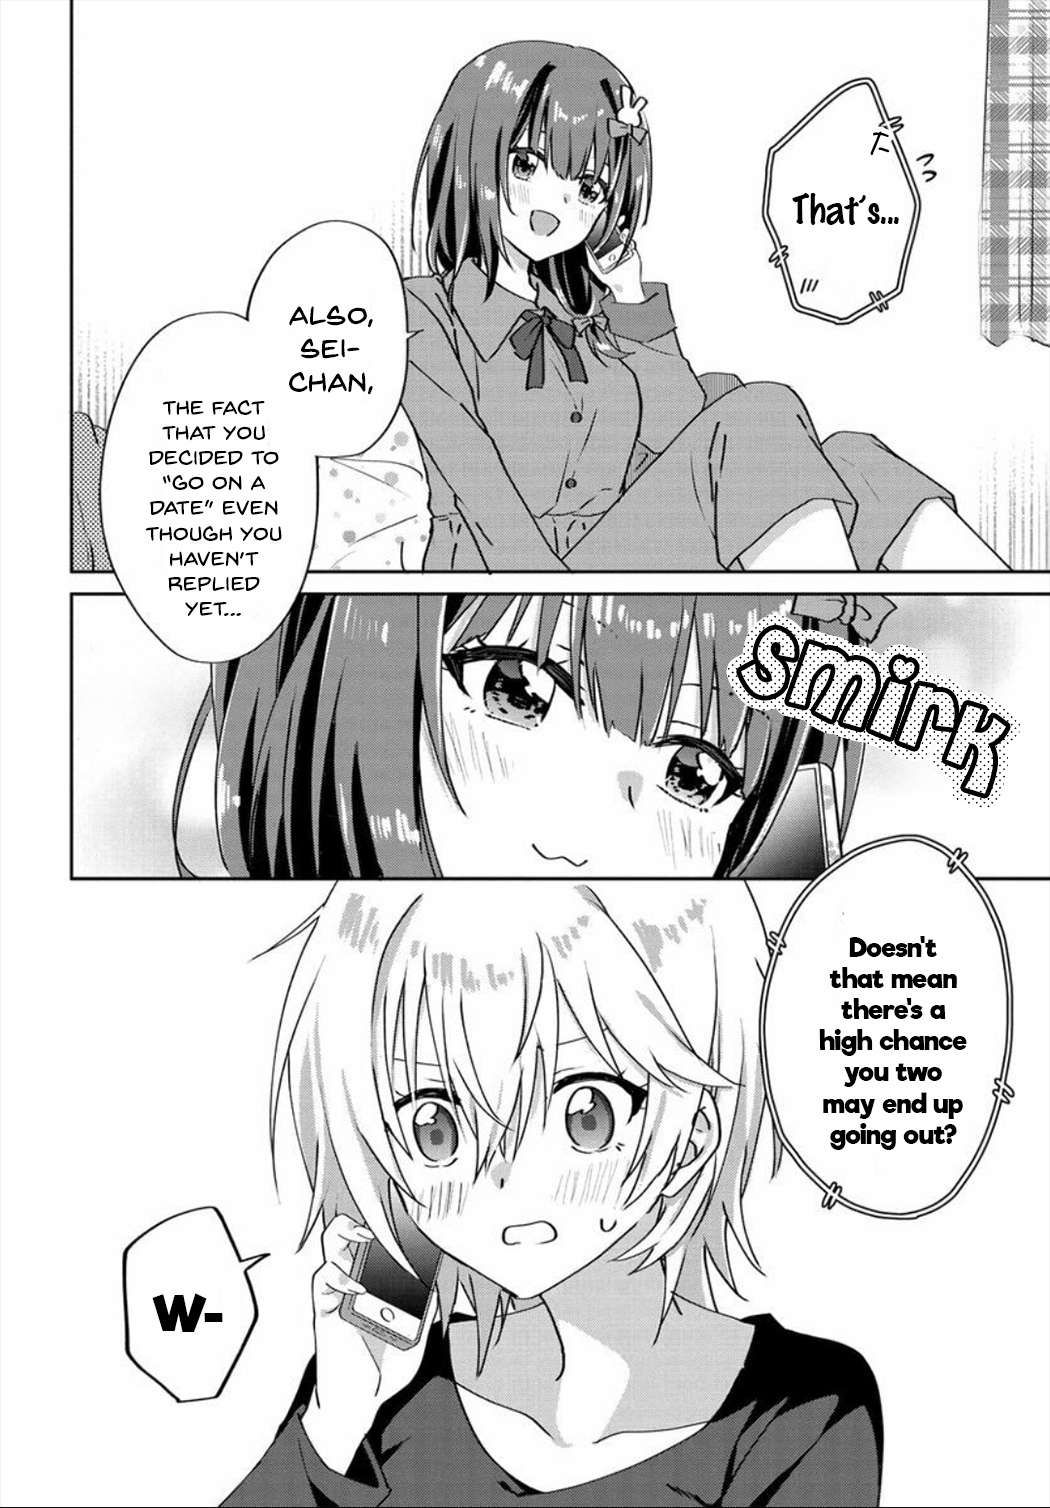 Since I’Ve Entered The World Of Romantic Comedy Manga, I’Ll Do My Best To Make The Losing Heroine Happy - chapter 6.6 - #4